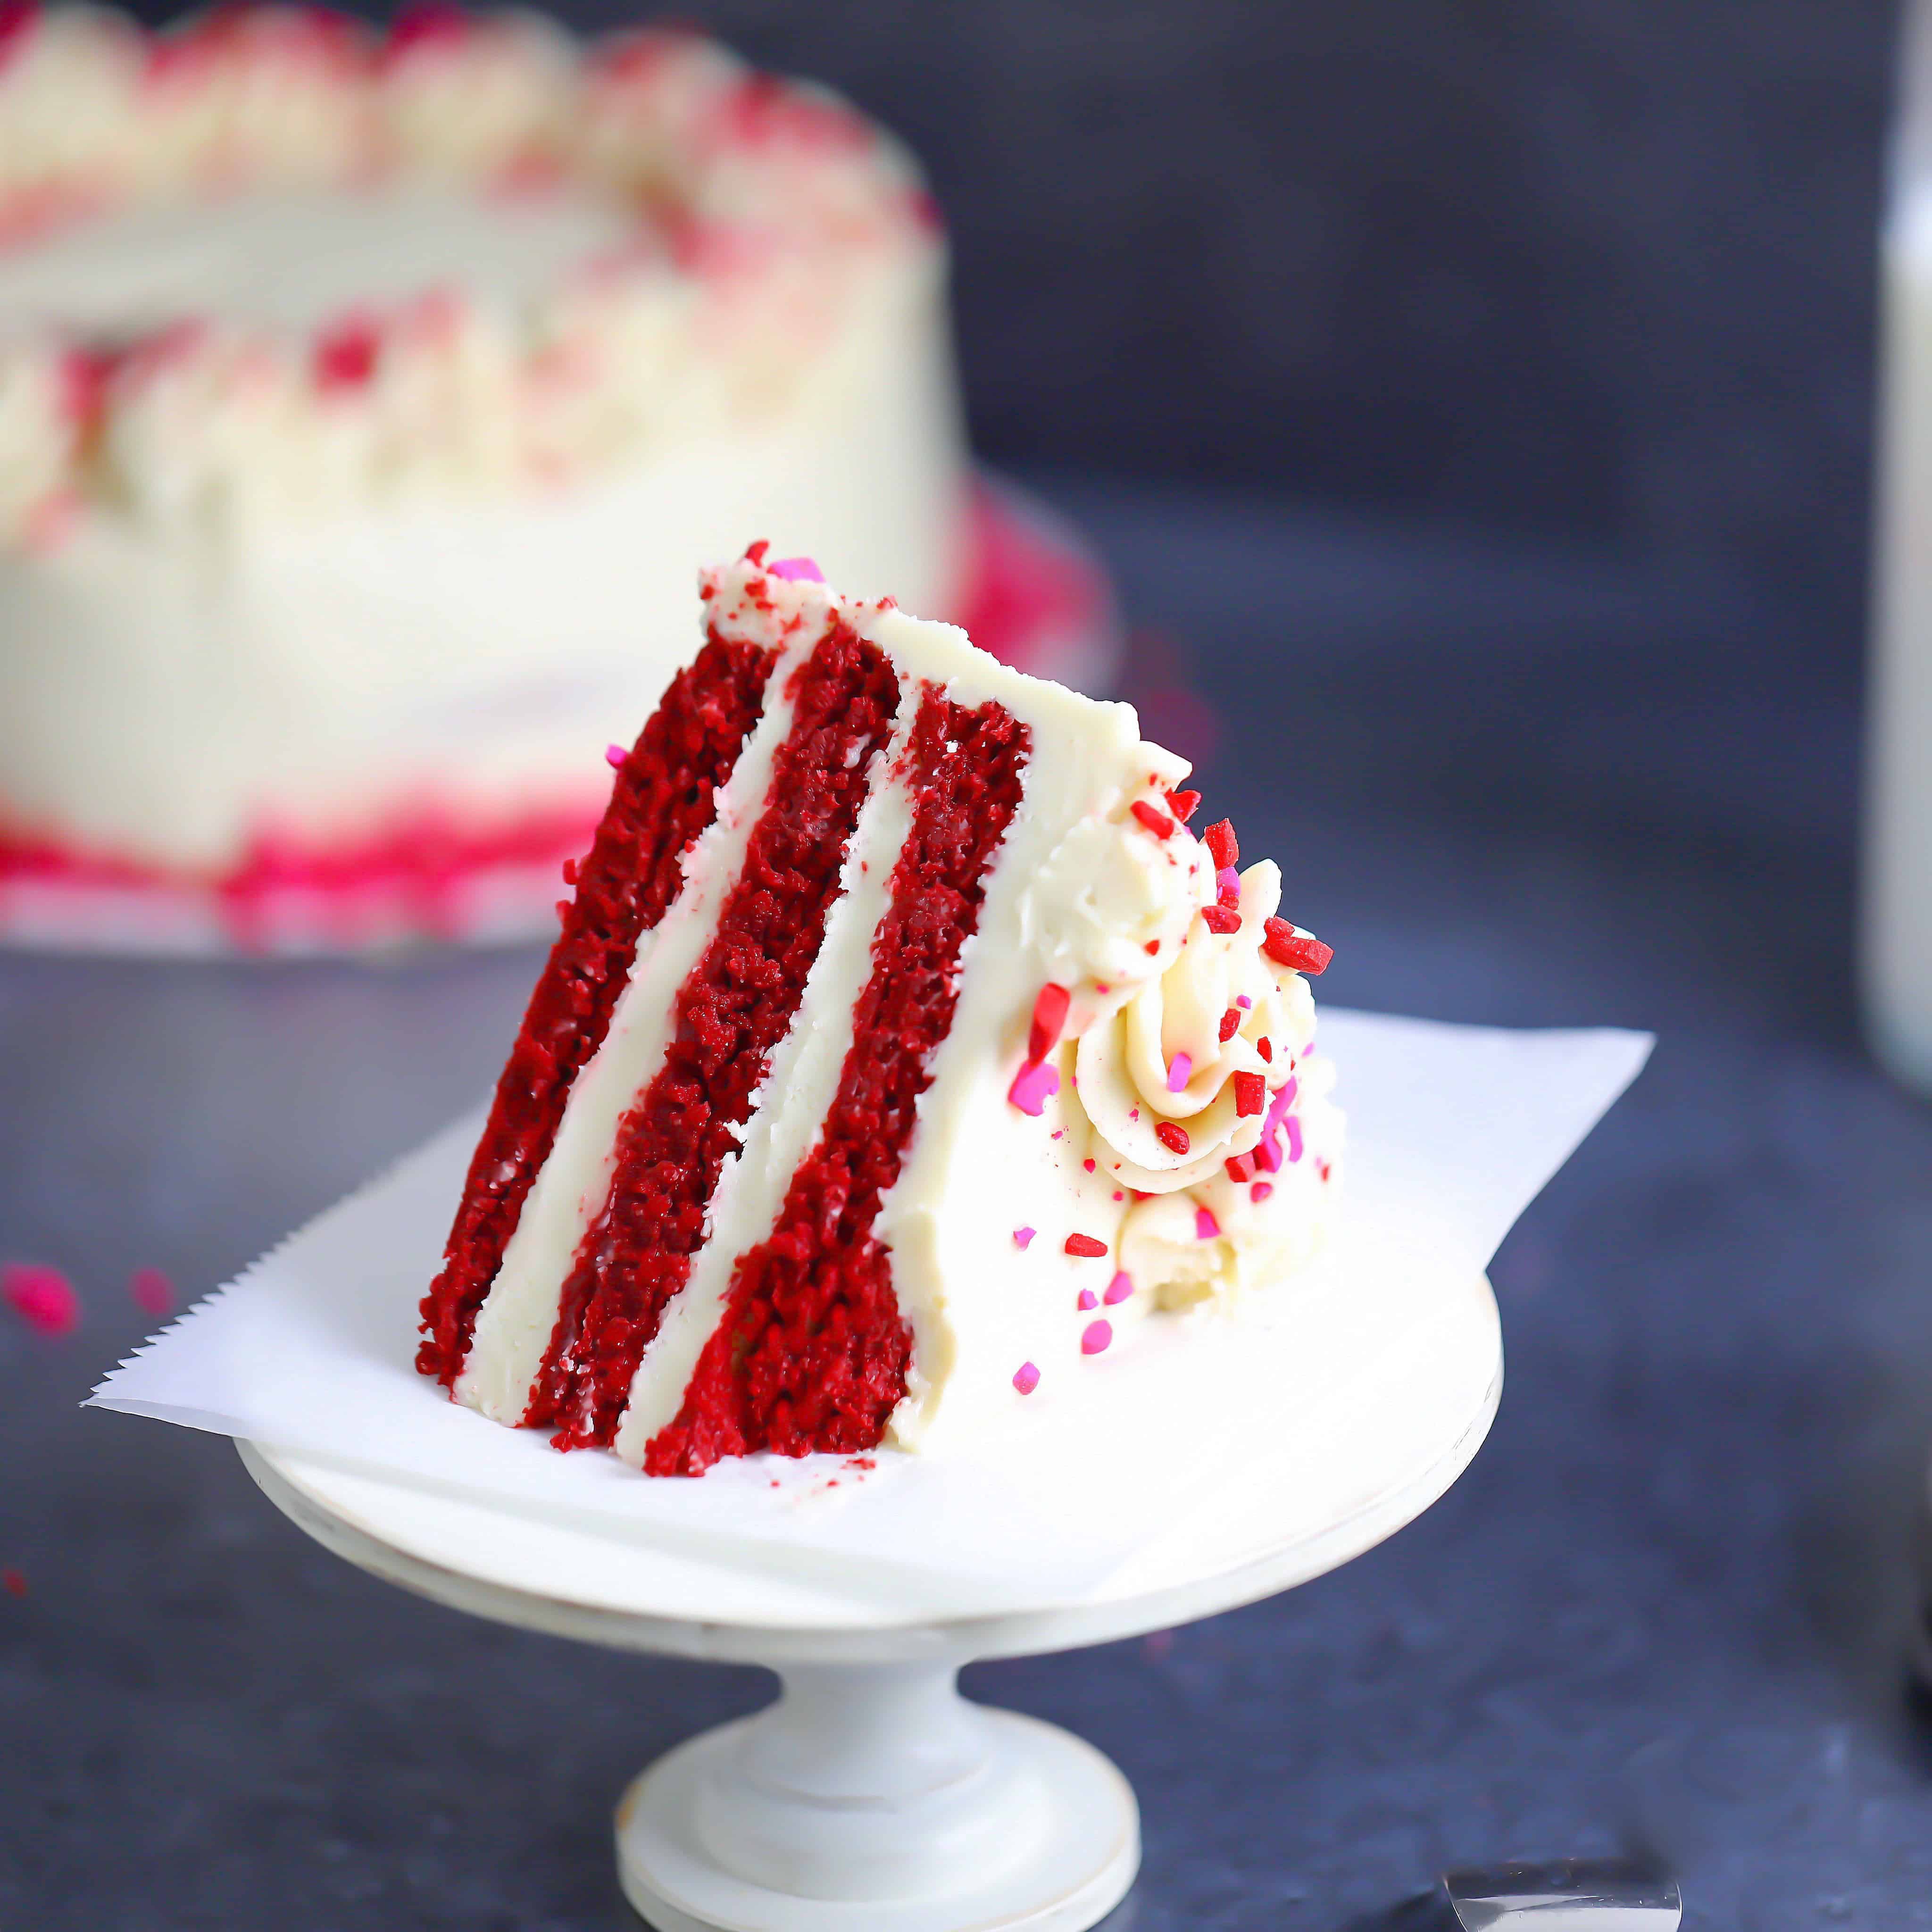 Low-Carb Red Velvet Cake/Cupcakes